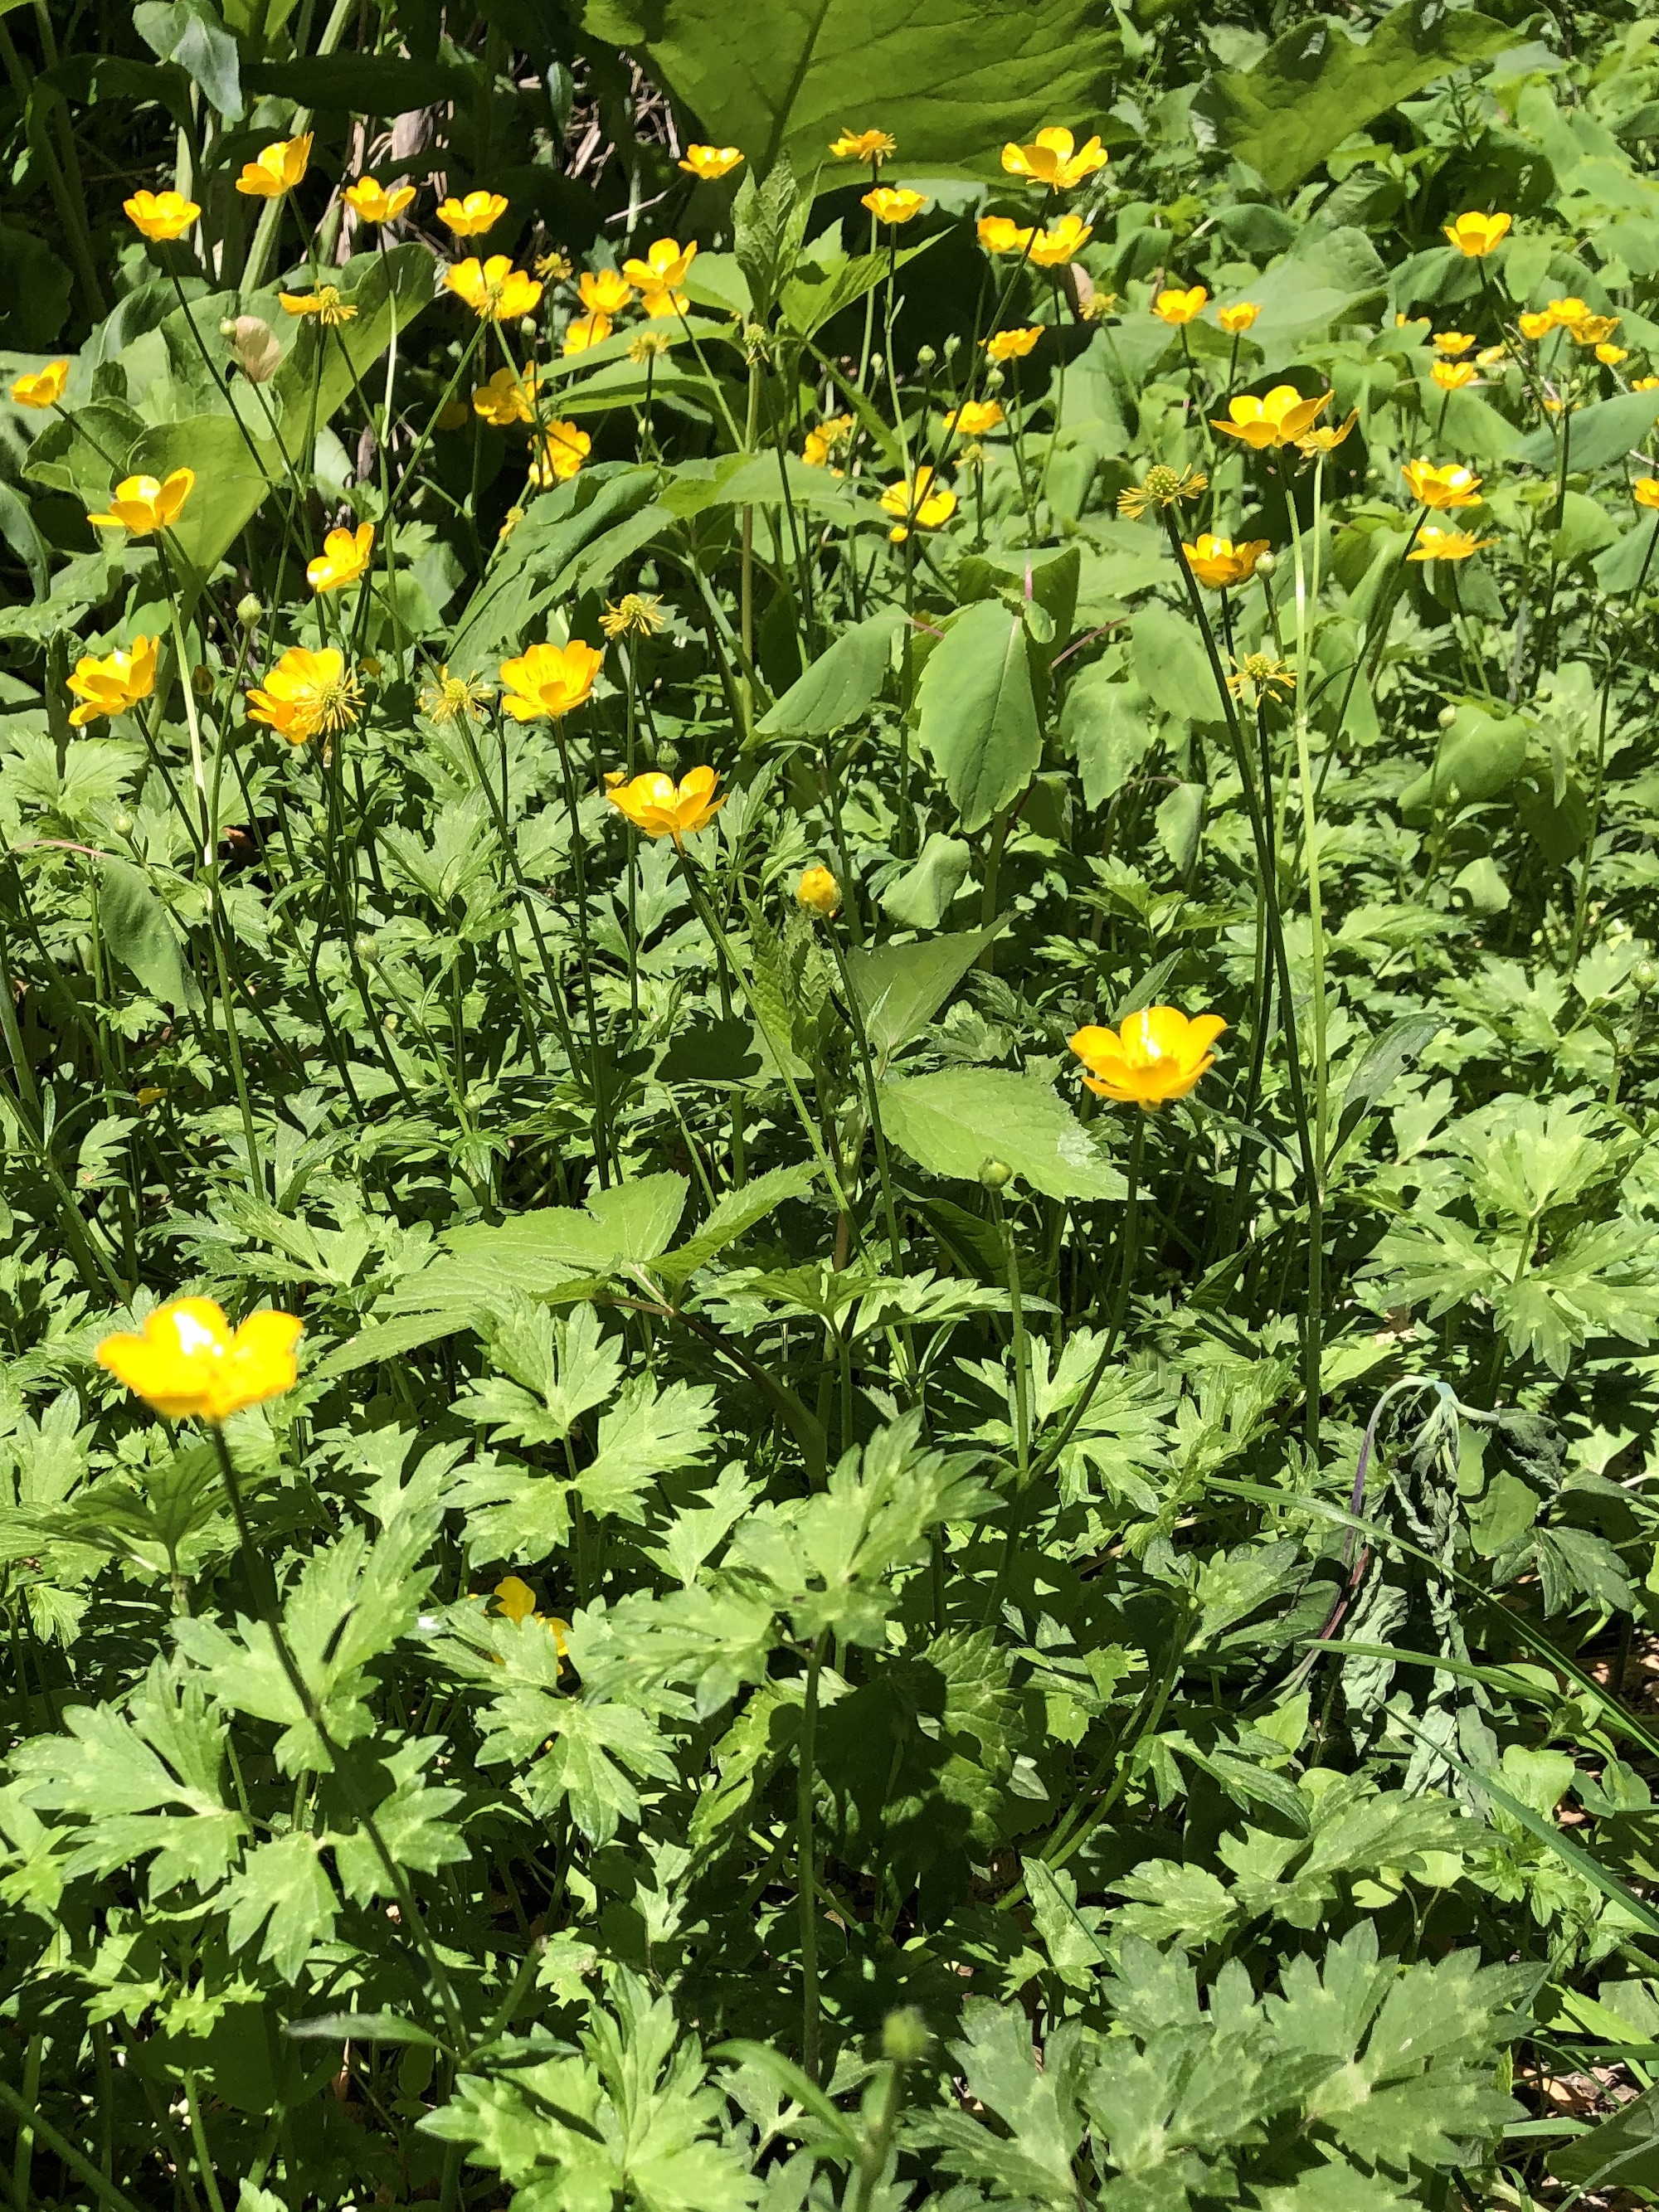 Creeping Buttercup in a grassy clearing along the bike path between Odana Road and Midvale Boulevard in Madison, Wisconsin on June 3, 2022.